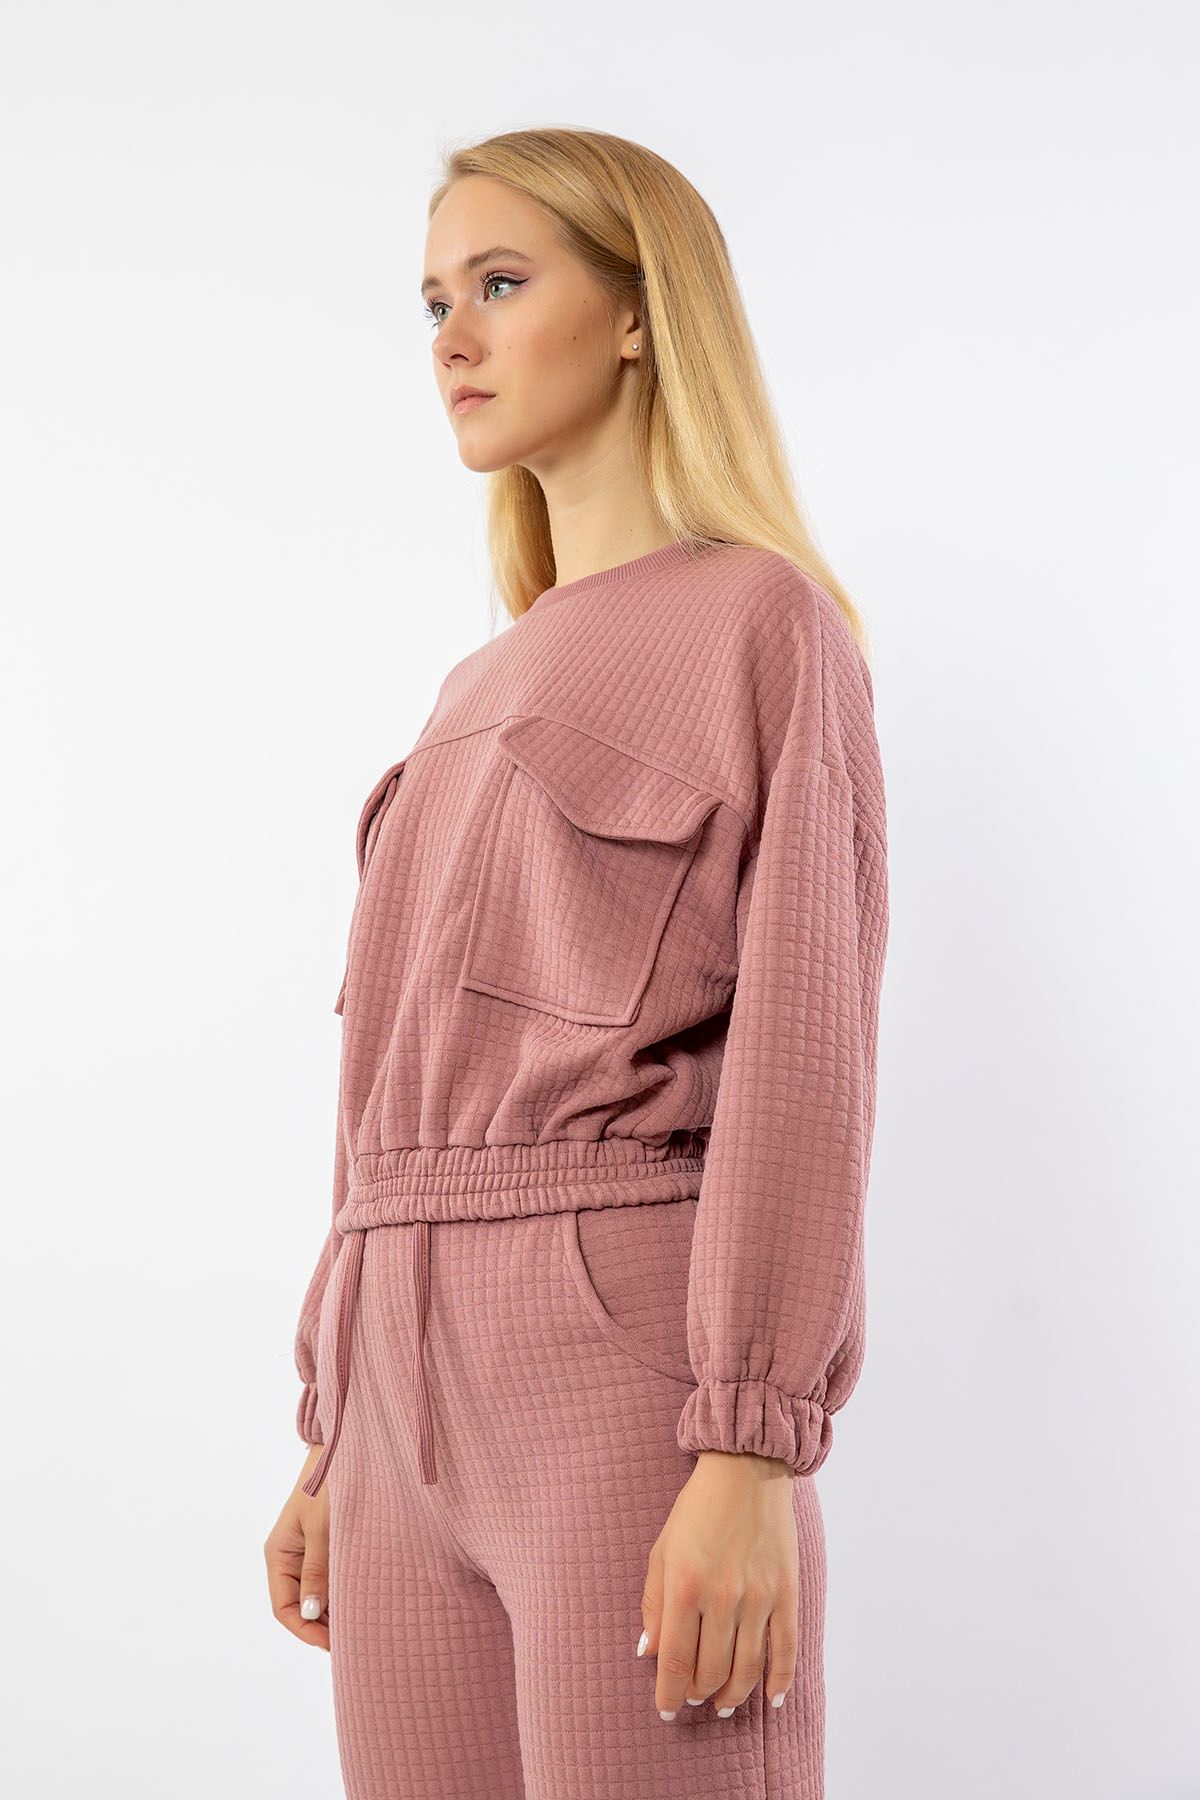 Quilted Fabric Bicycle Collar Oversize Double Pocket Women Sweatshirt - Light Pink